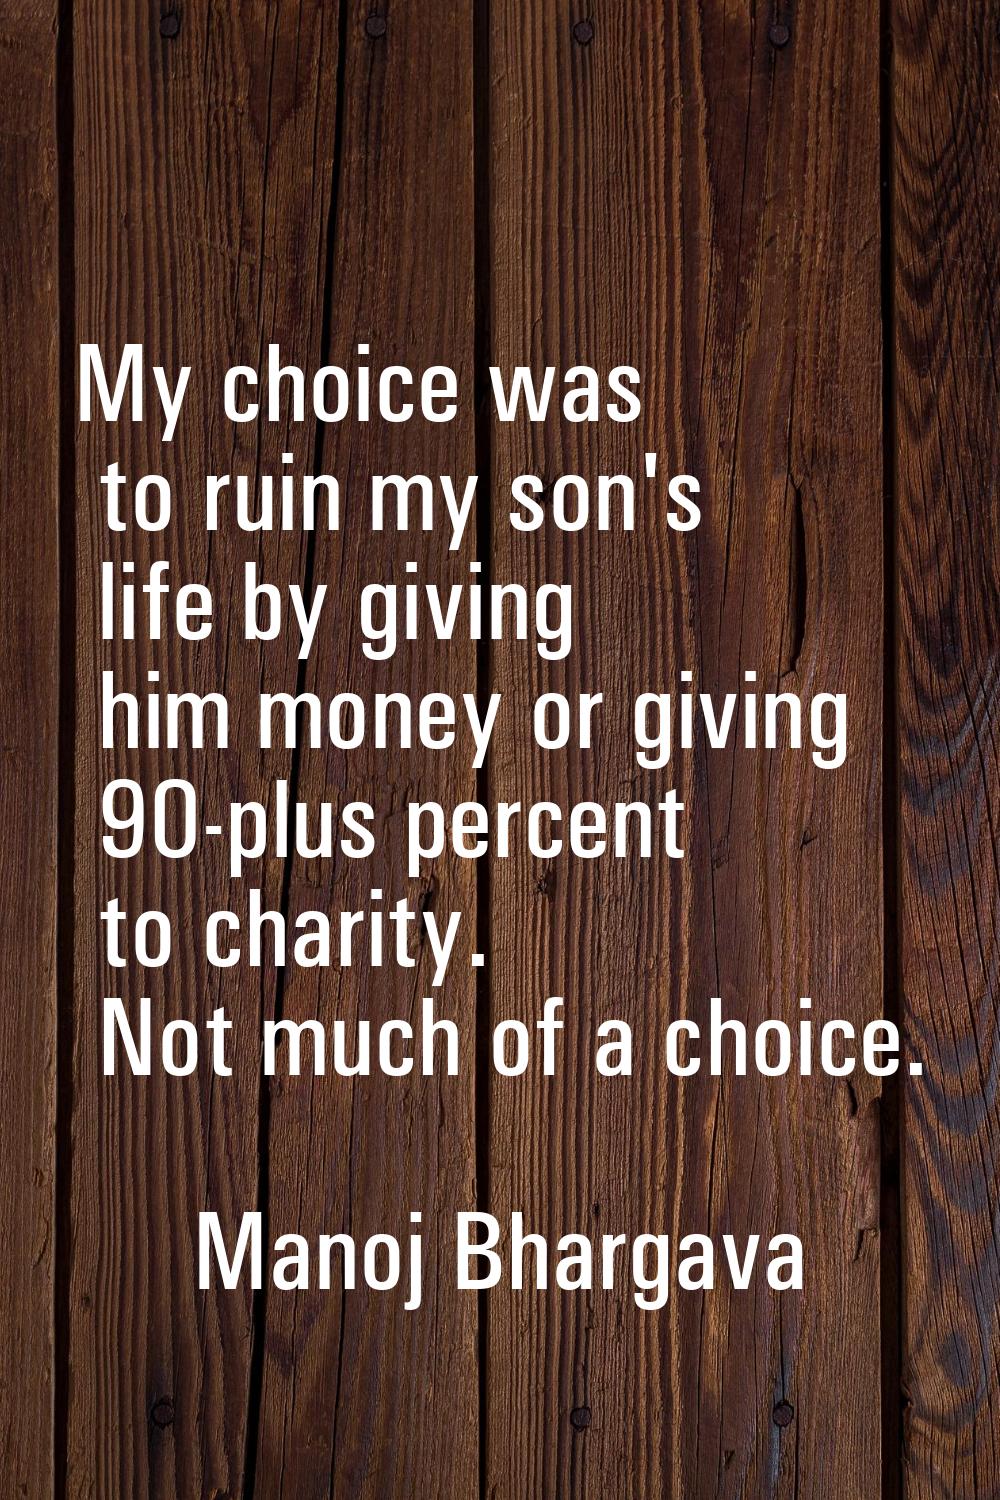 My choice was to ruin my son's life by giving him money or giving 90-plus percent to charity. Not m